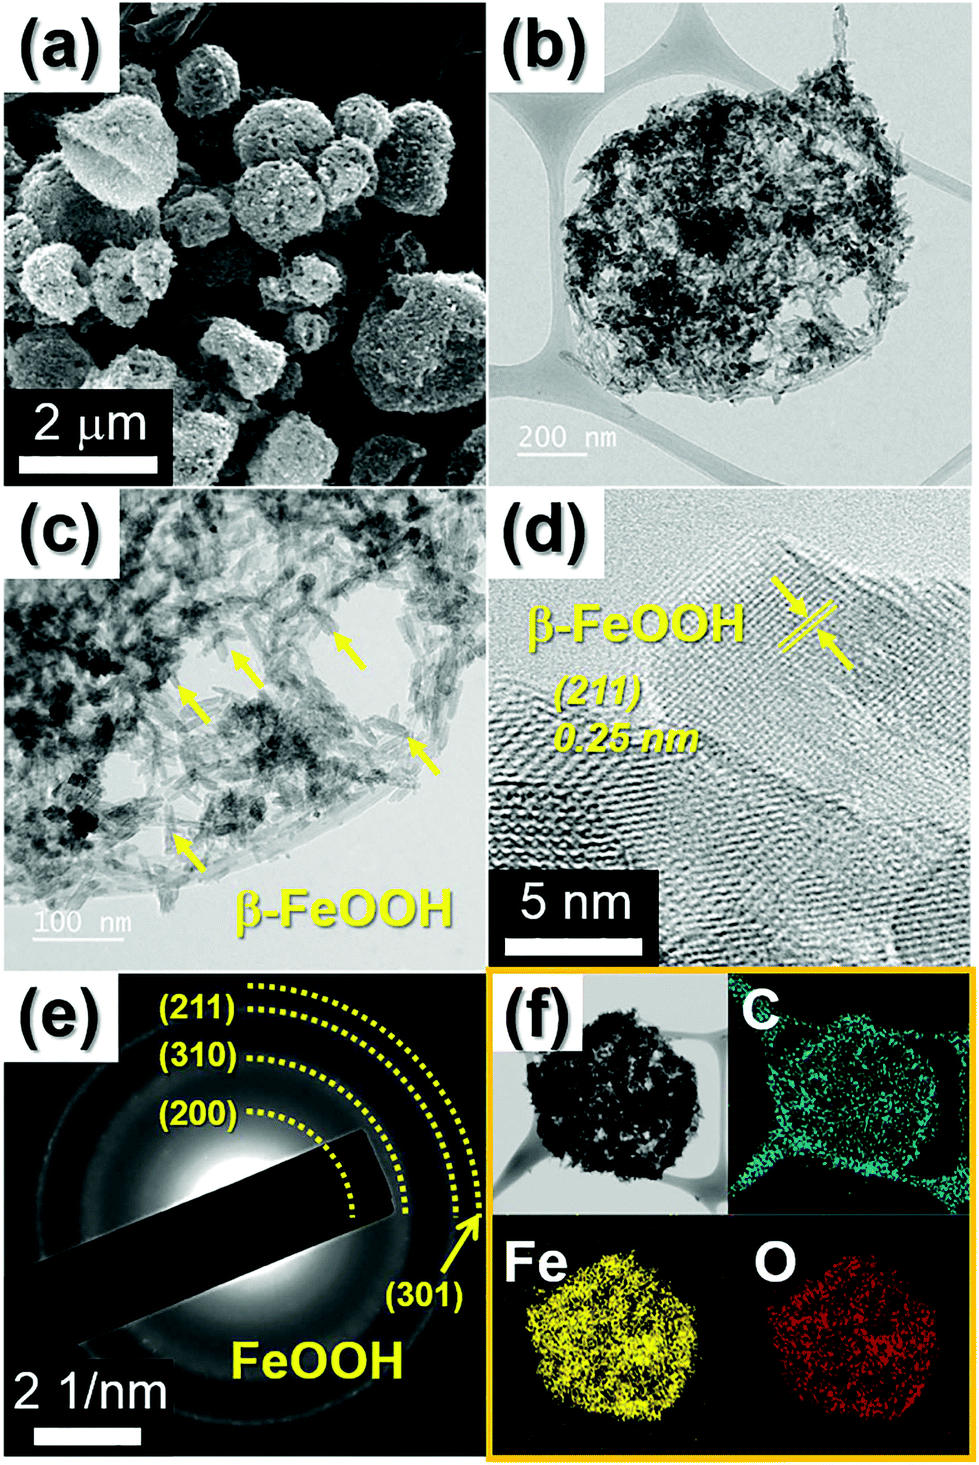 Three Dimensional Porous Microspheres Comprising Hollow Fe 2 O 3 Nanorods Cnt Building Blocks With Superior Electrochemical Performance For Lithium Io Nanoscale Rsc Publishing Doi 10 1039 C8nr02686f